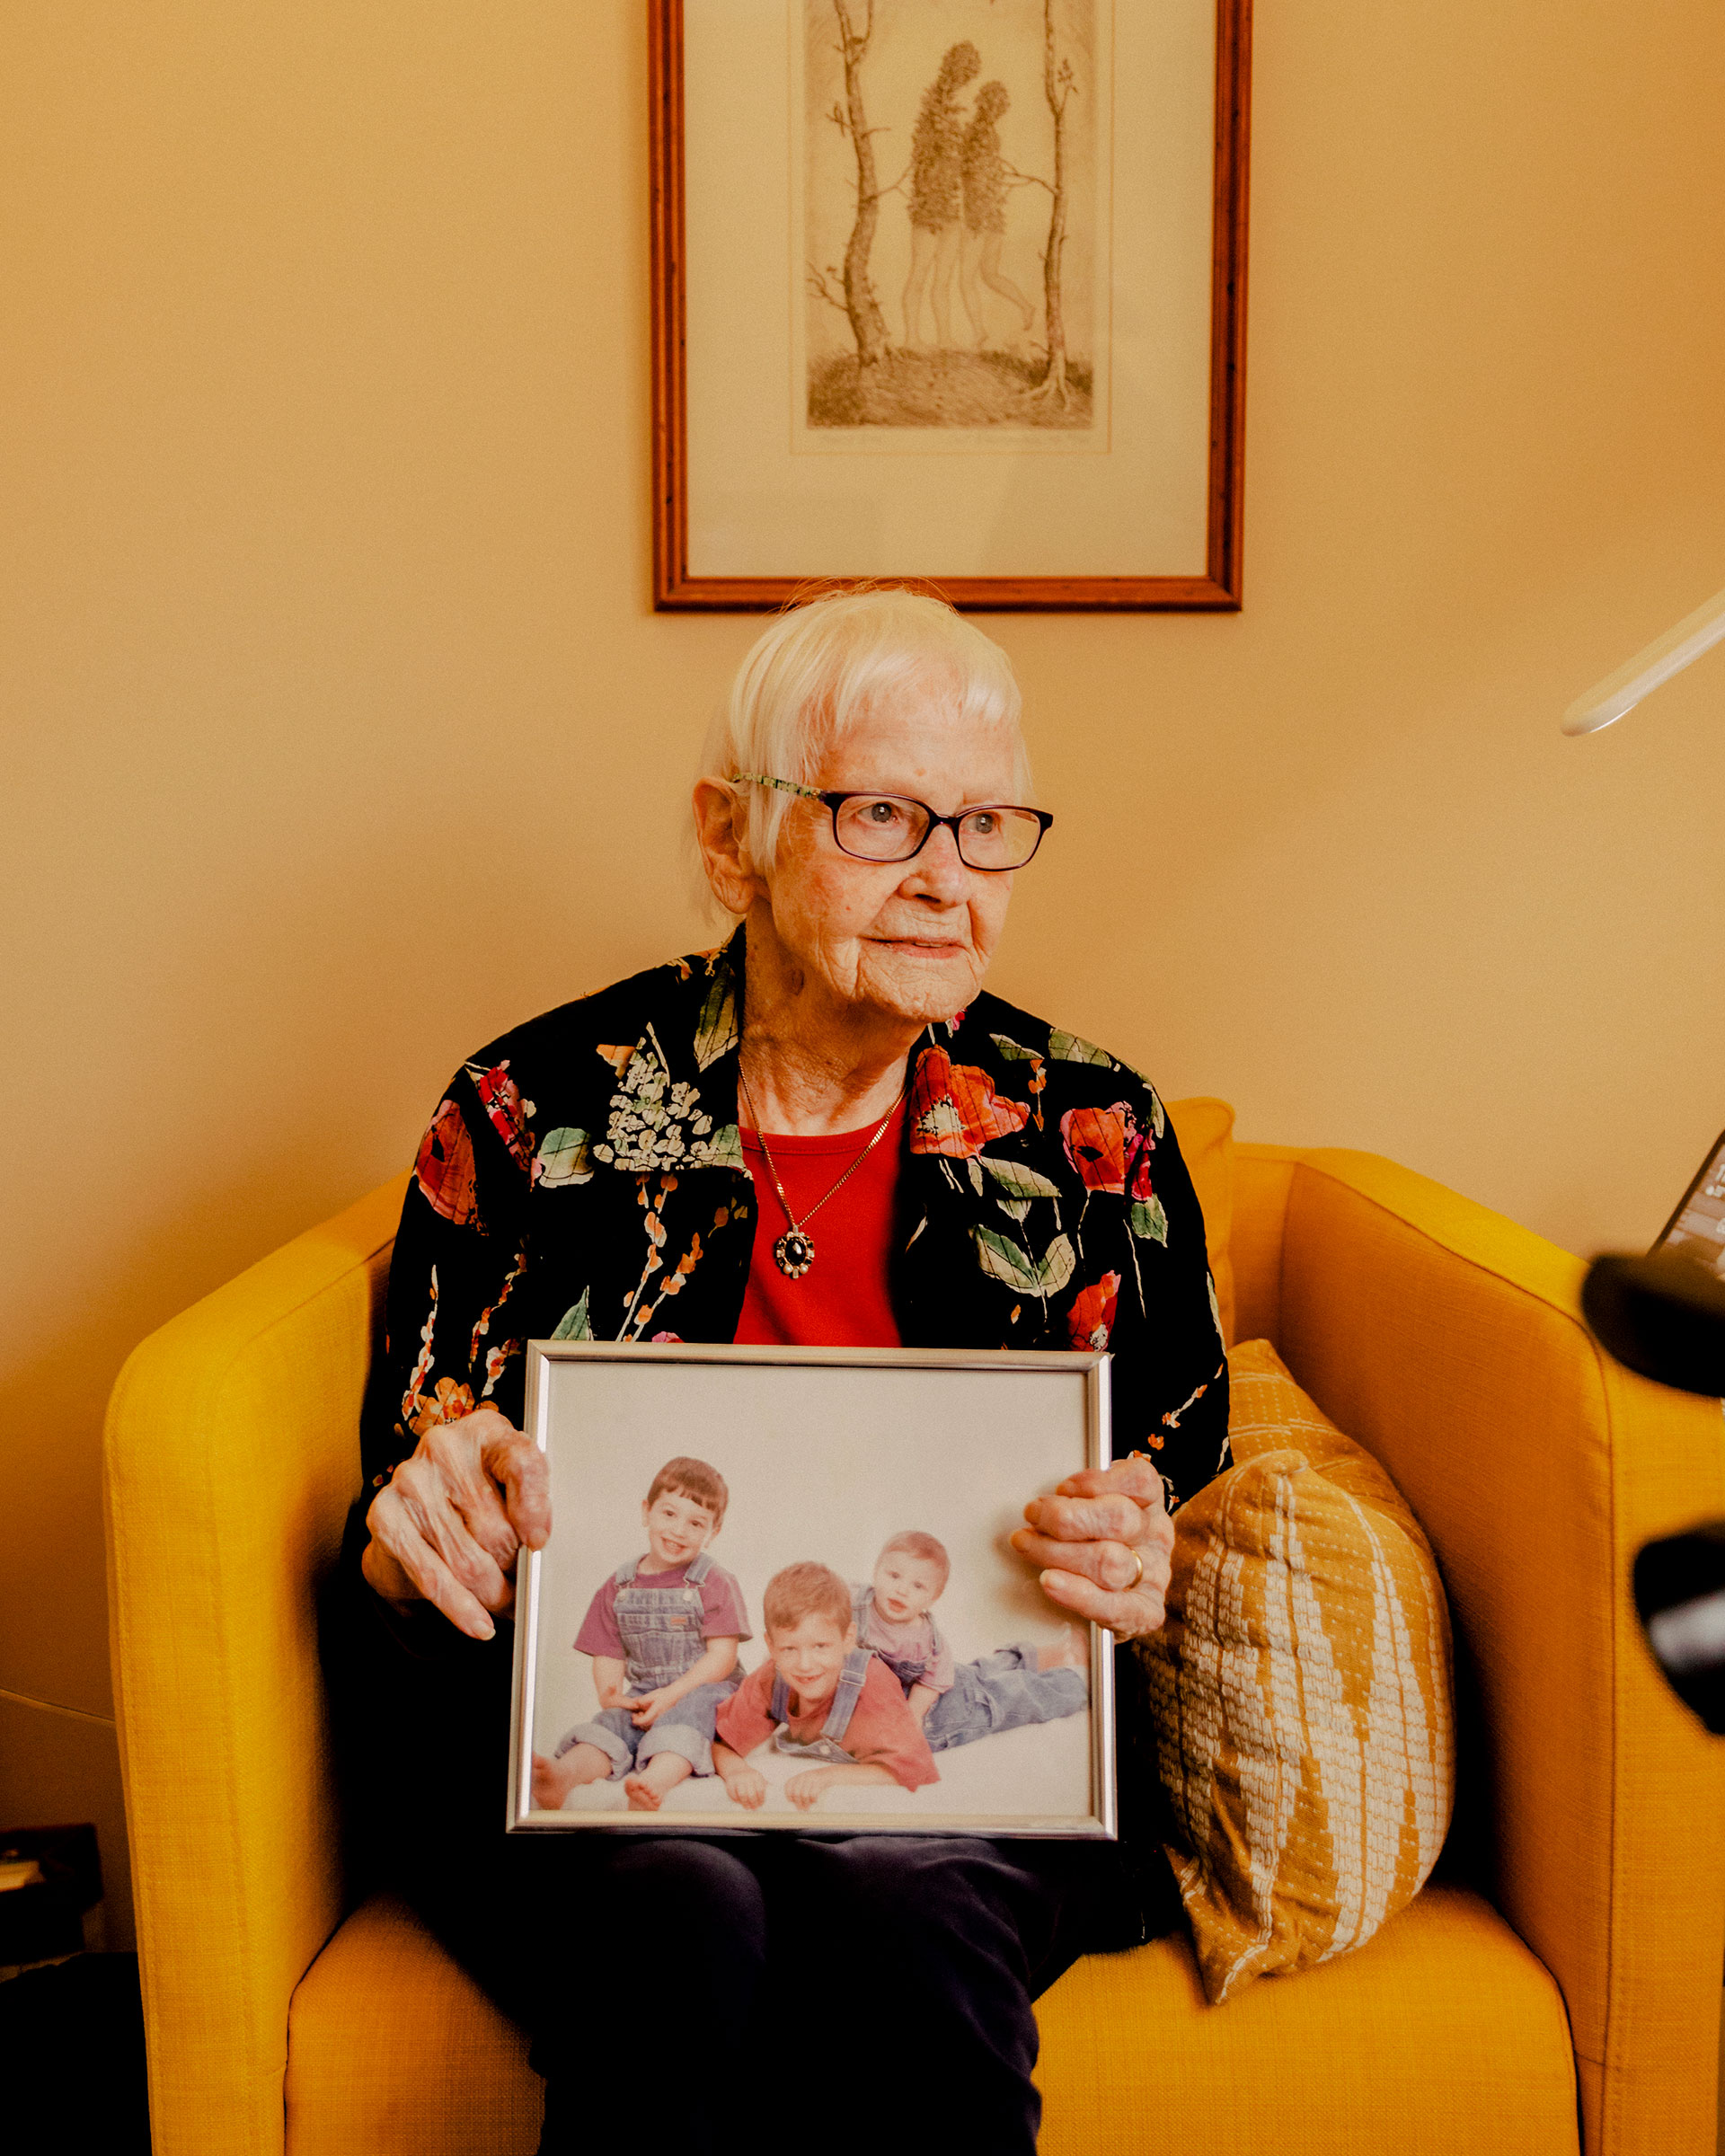 Ronnel, 92, hopes the vaccine will allow her to embrace her children and grandchildren, whom she hasn’t seen in person since the fall (Evan Jenkins for TIME)